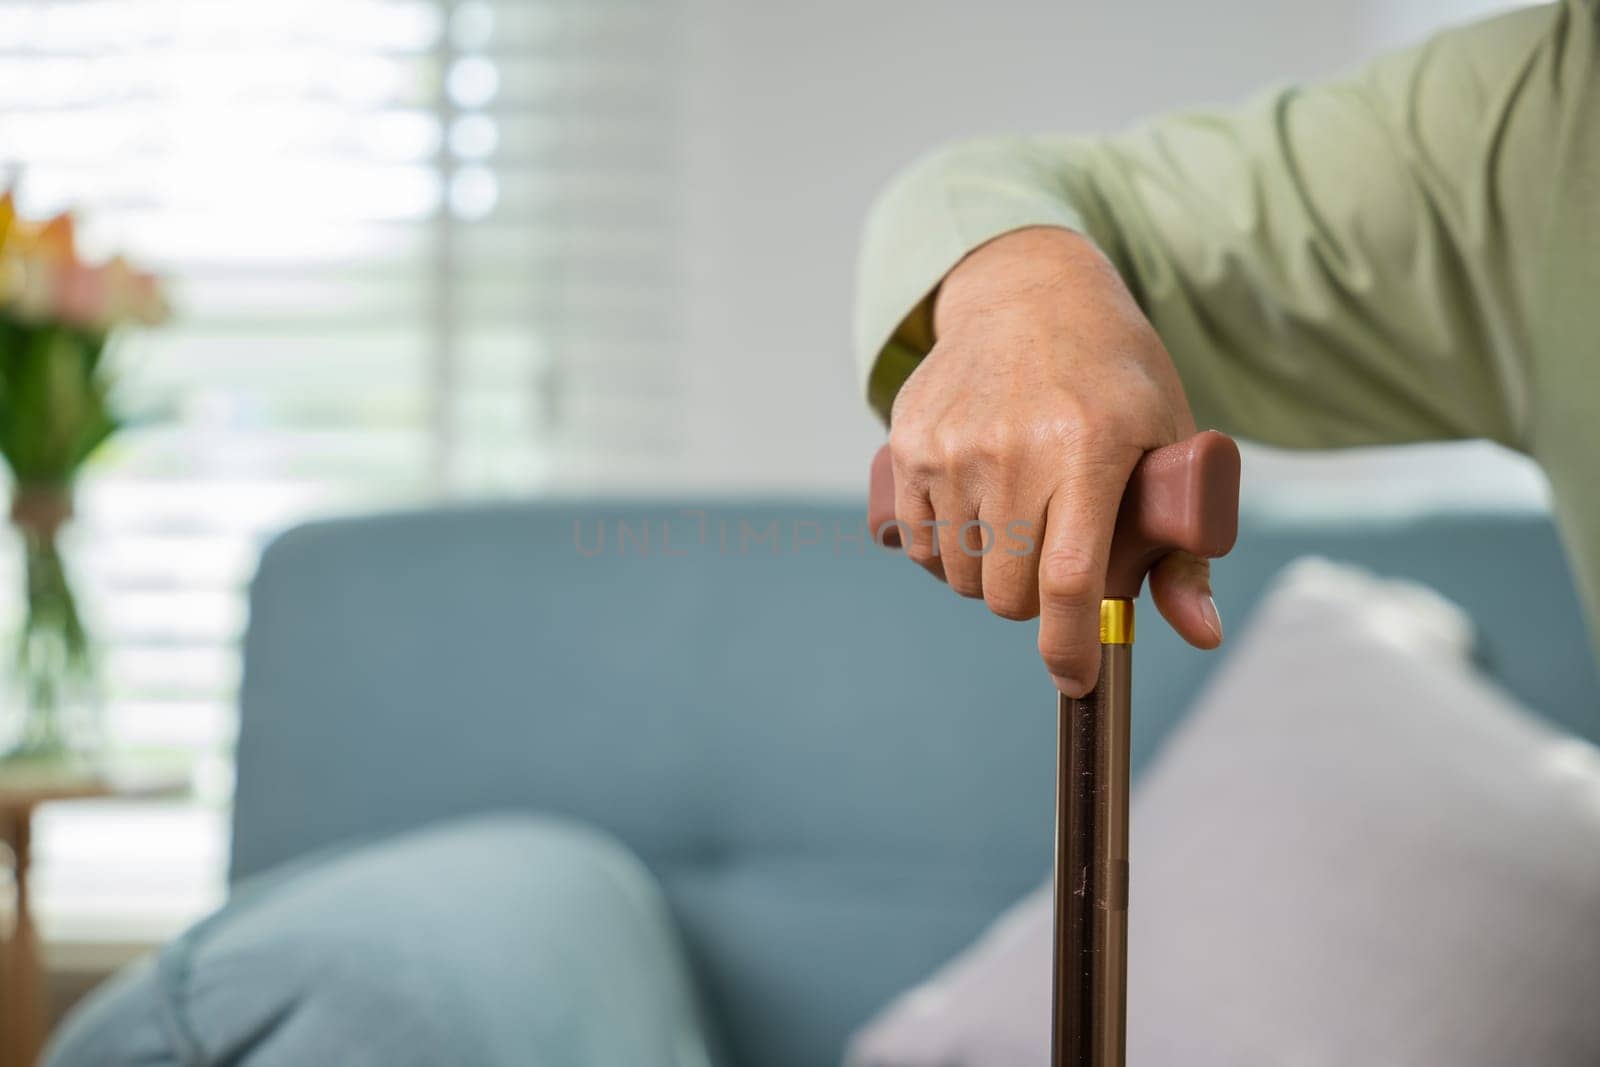 Asian senior old man with eyeglasses type to standing up from sofa with walking cane stick to walk at home, Elderly suffering from knee pain ache holding handle of cane, retirement medical healthcare